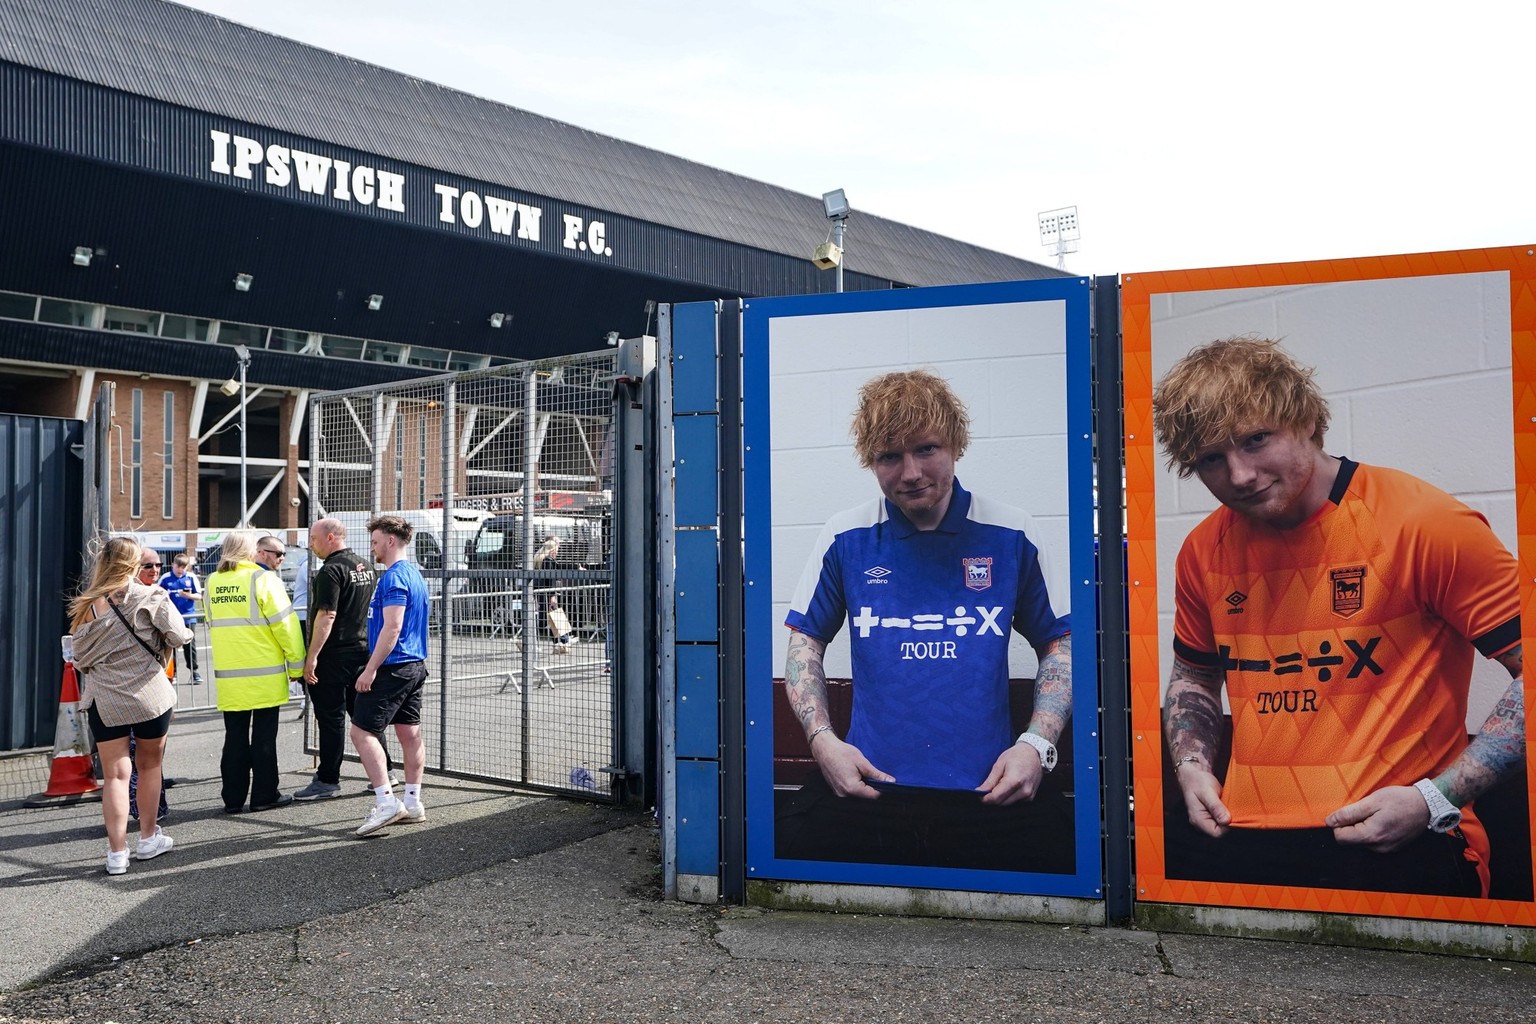 Ipswich Town v Middlesbrough - Sky Bet Championship - Portman Road Ipswich Town fans walk past images of Ed Sheeran as they enter the ground before the Sky Bet Championship match at Portman Road, Ipsw ...